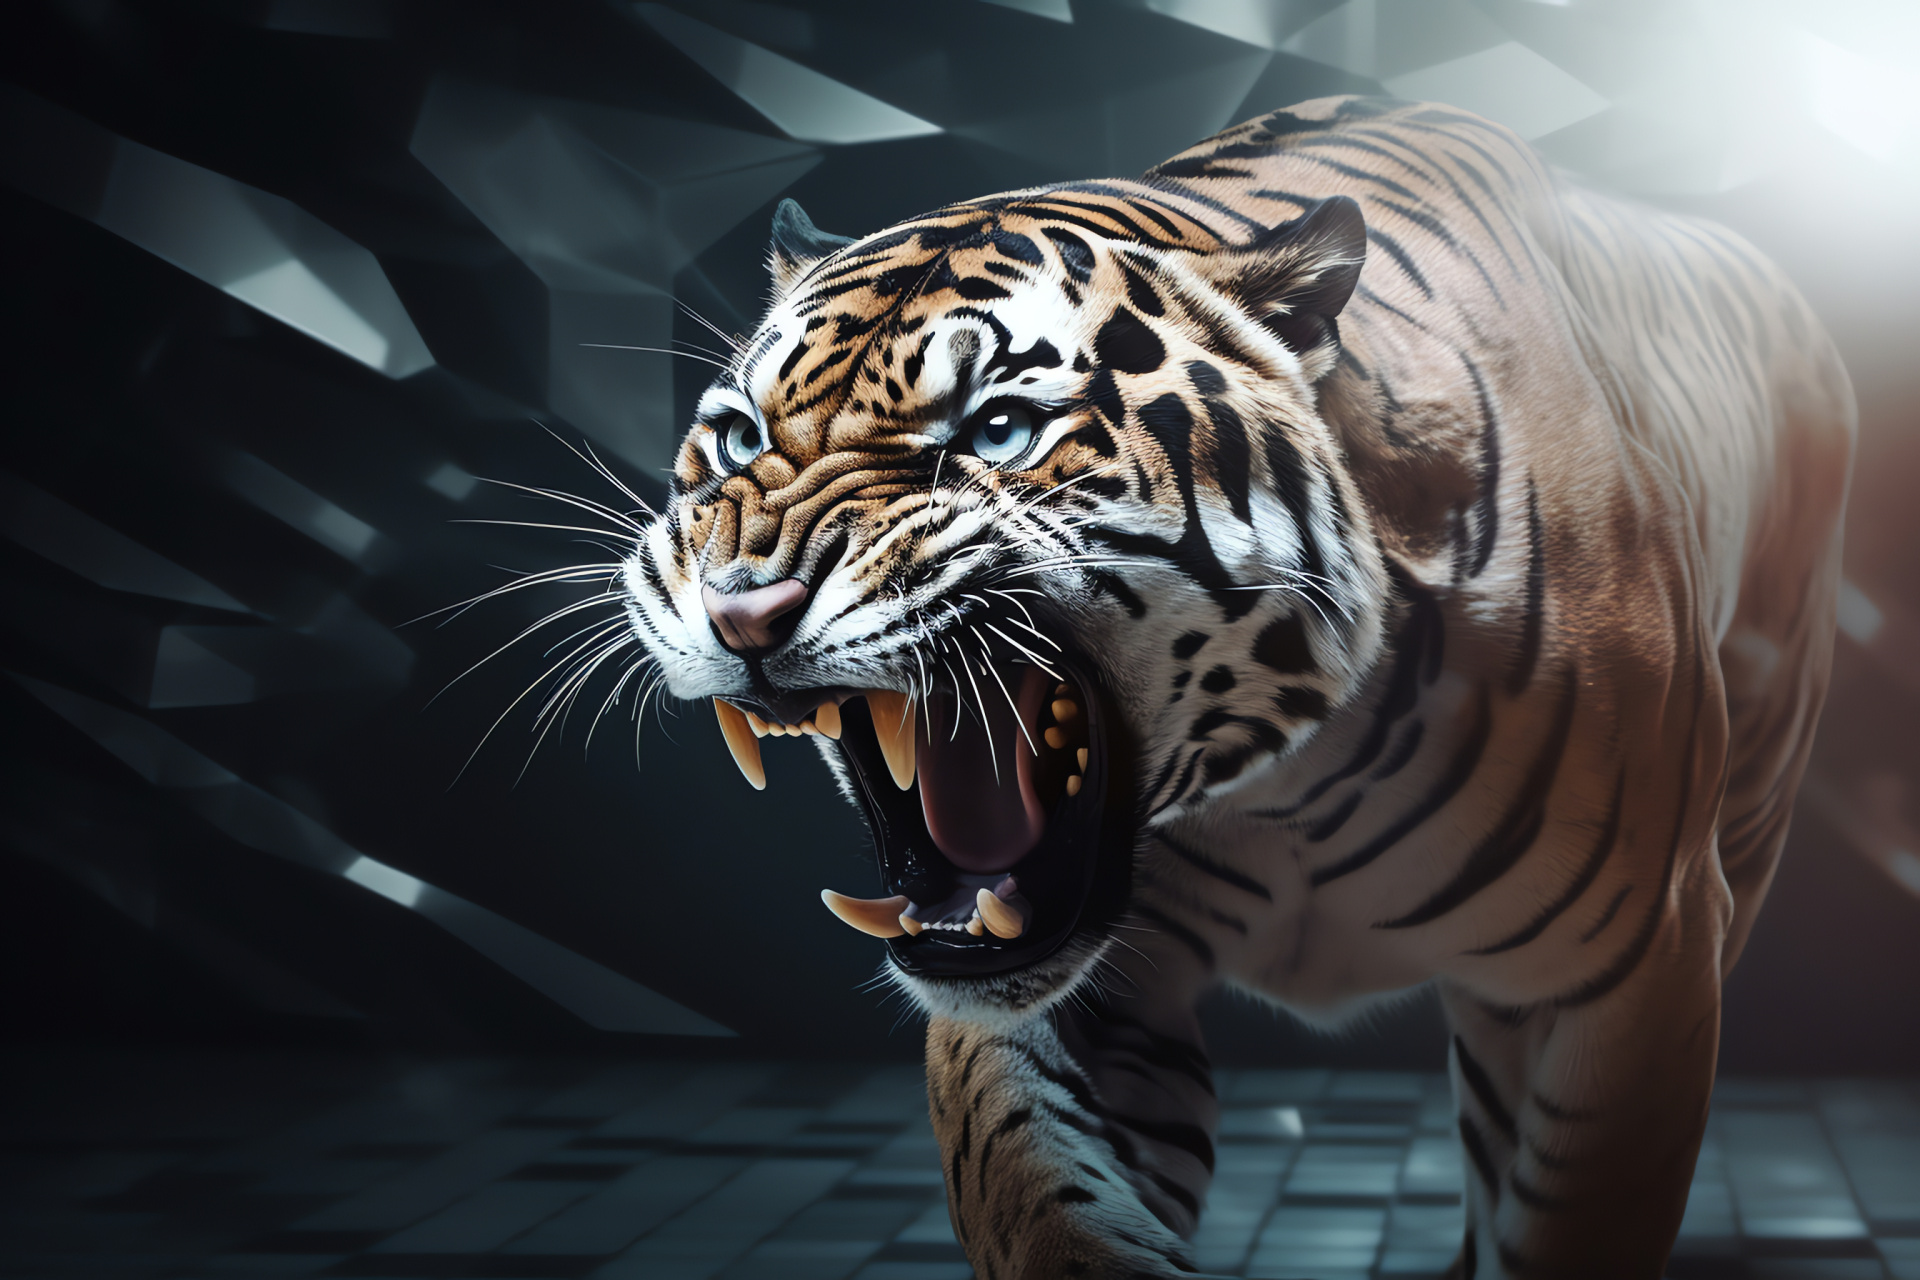 Saber Tooth Tiger, flowing fur, gray and black, abstract patterns backdrop, HD Desktop Wallpaper